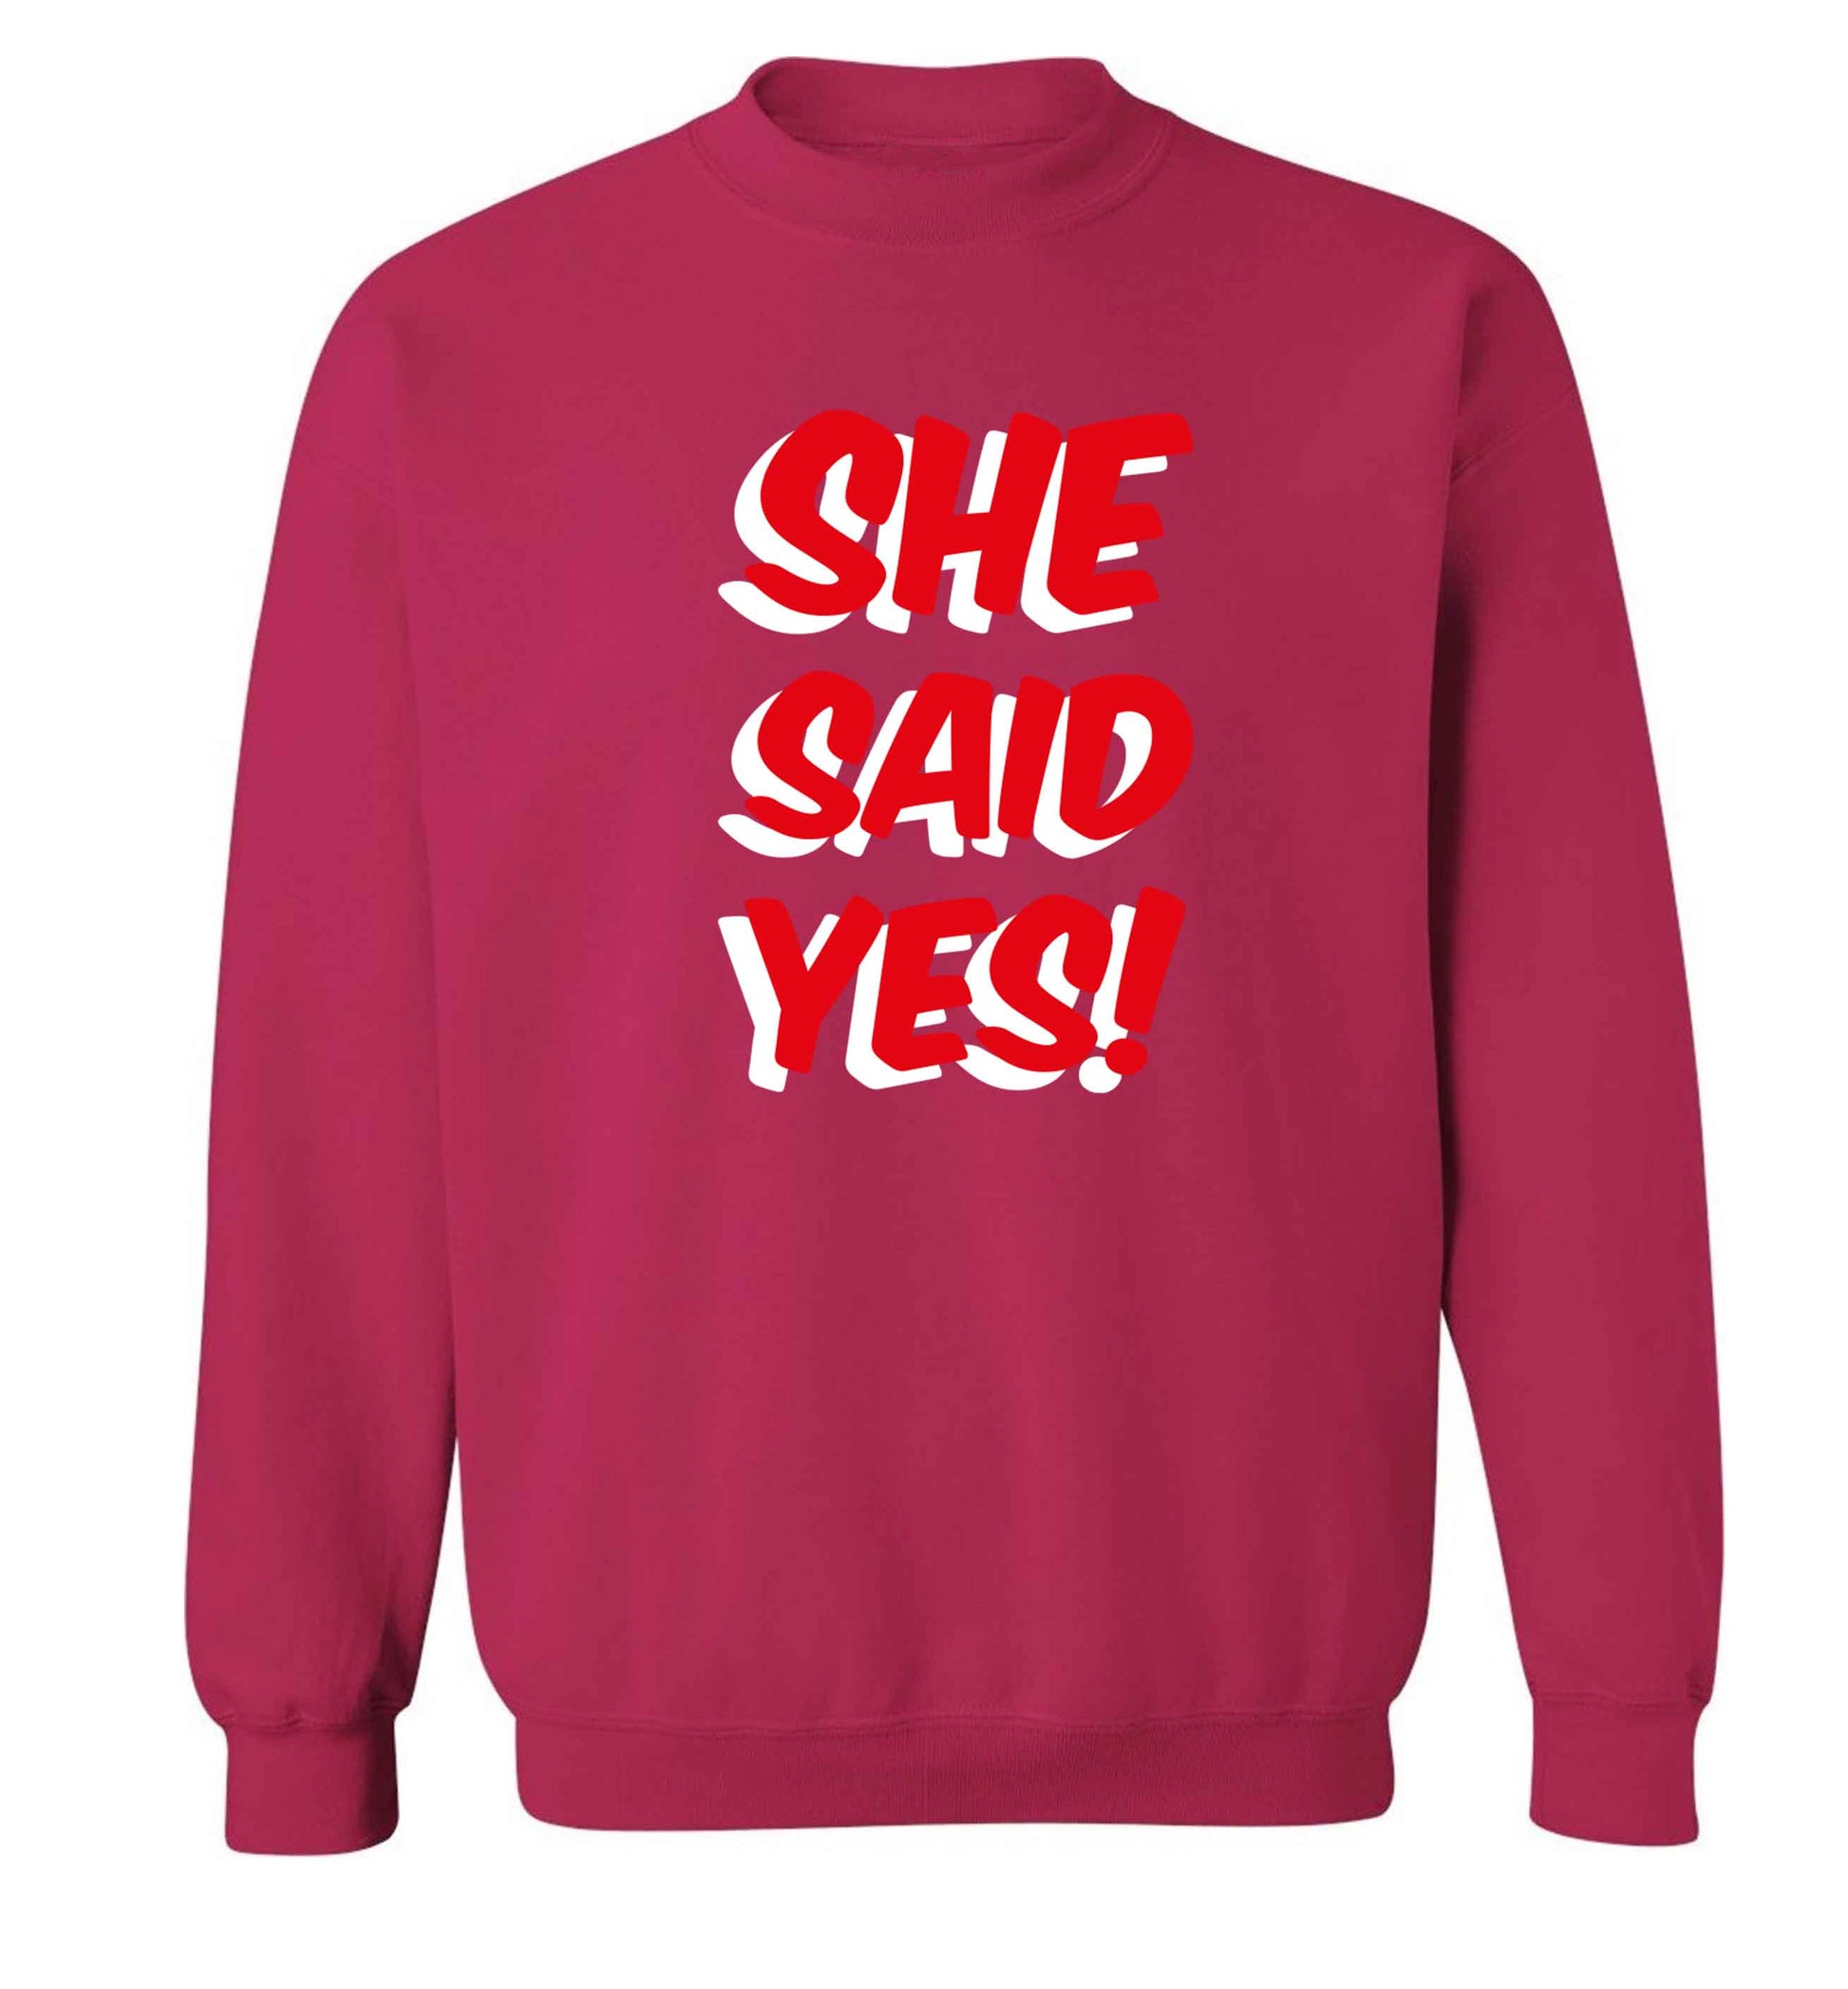 She said yes adult's unisex pink sweater 2XL